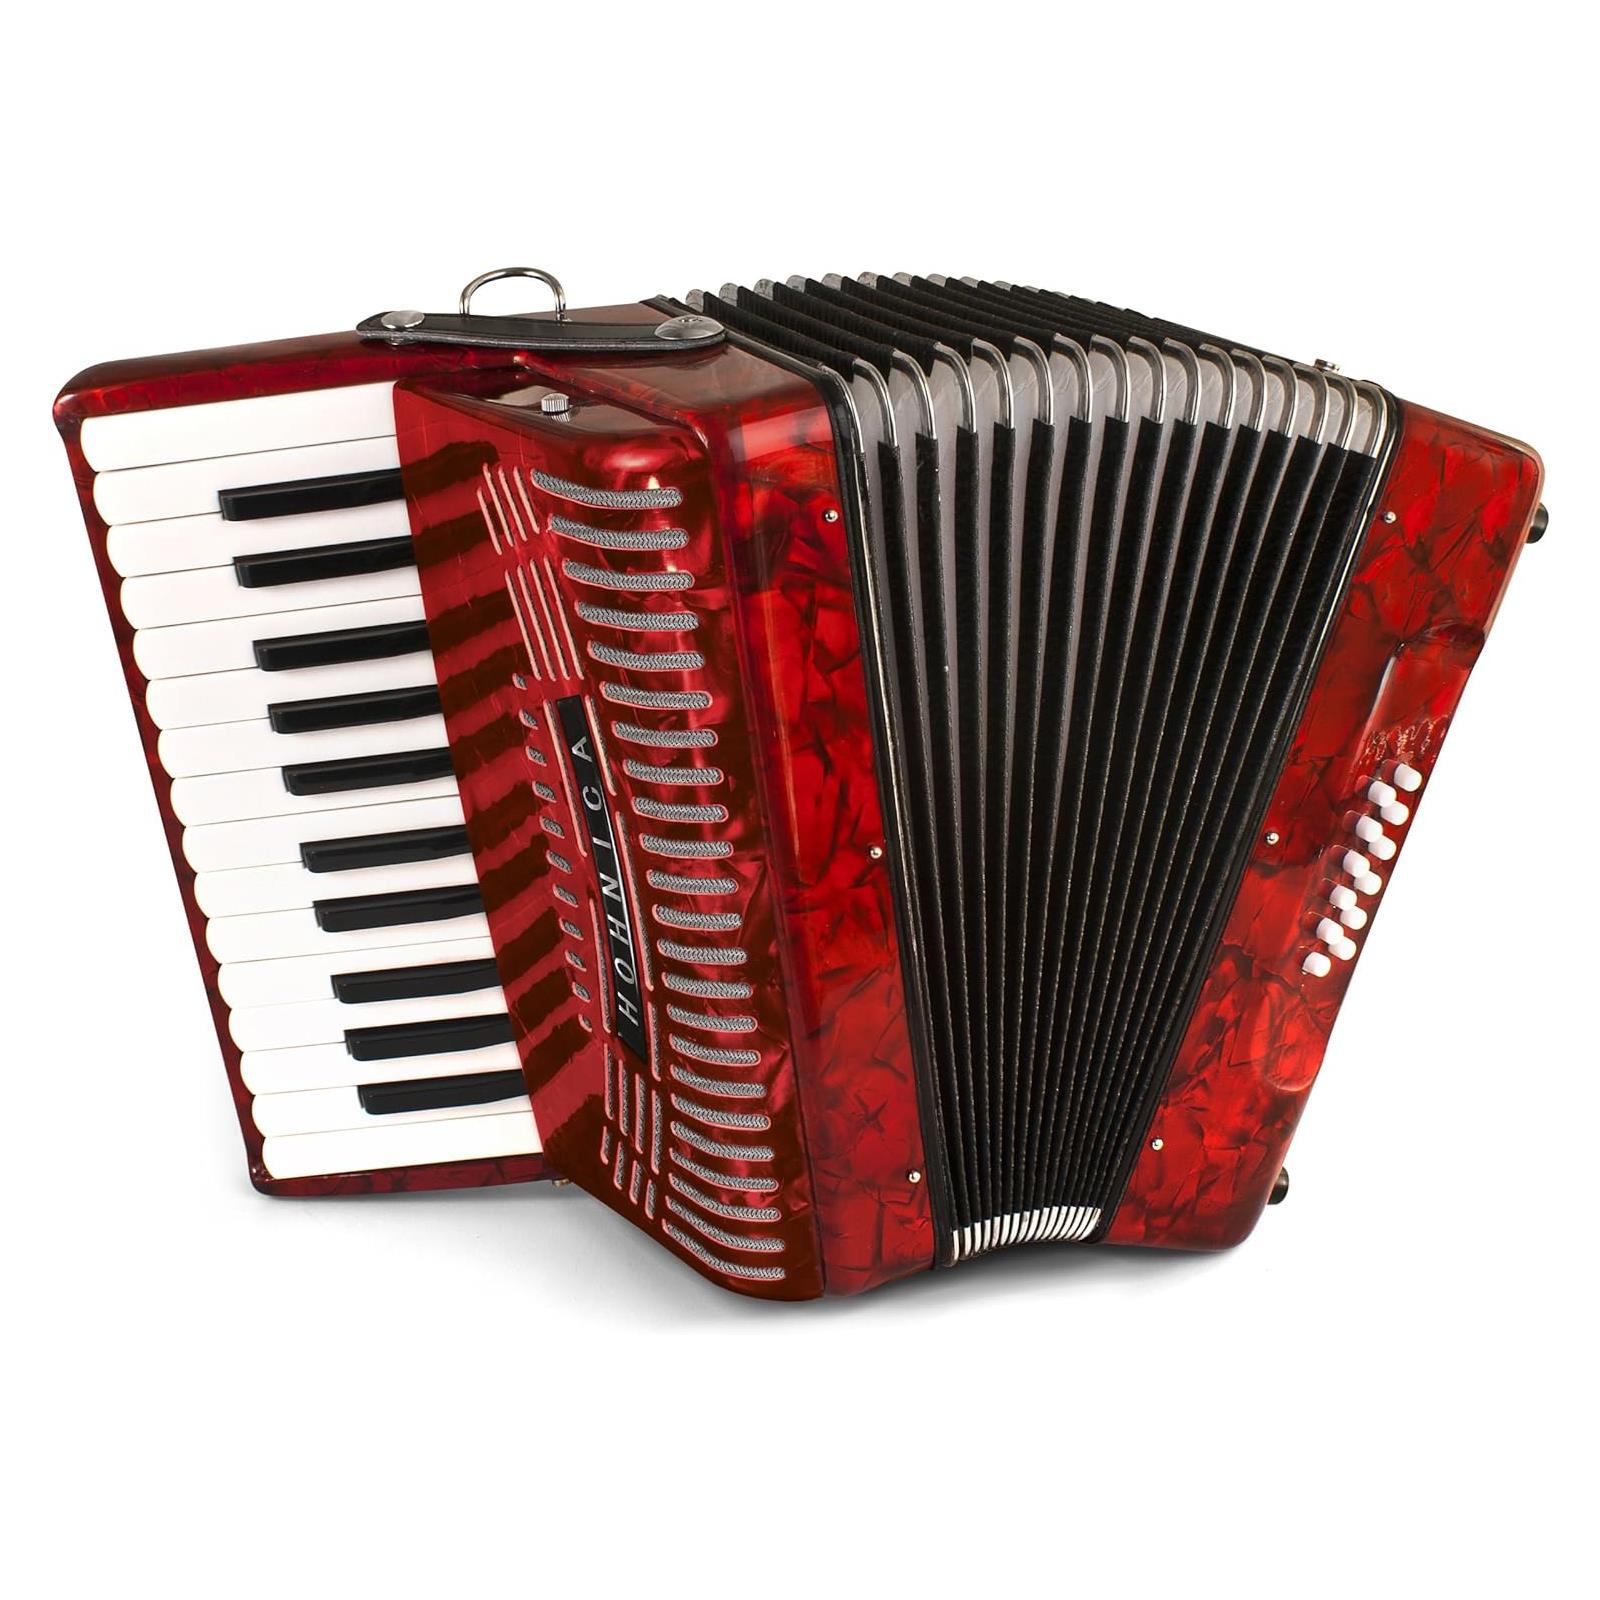 Hohner 12 Bass Entry Level Piano ACCORDION, pearl red